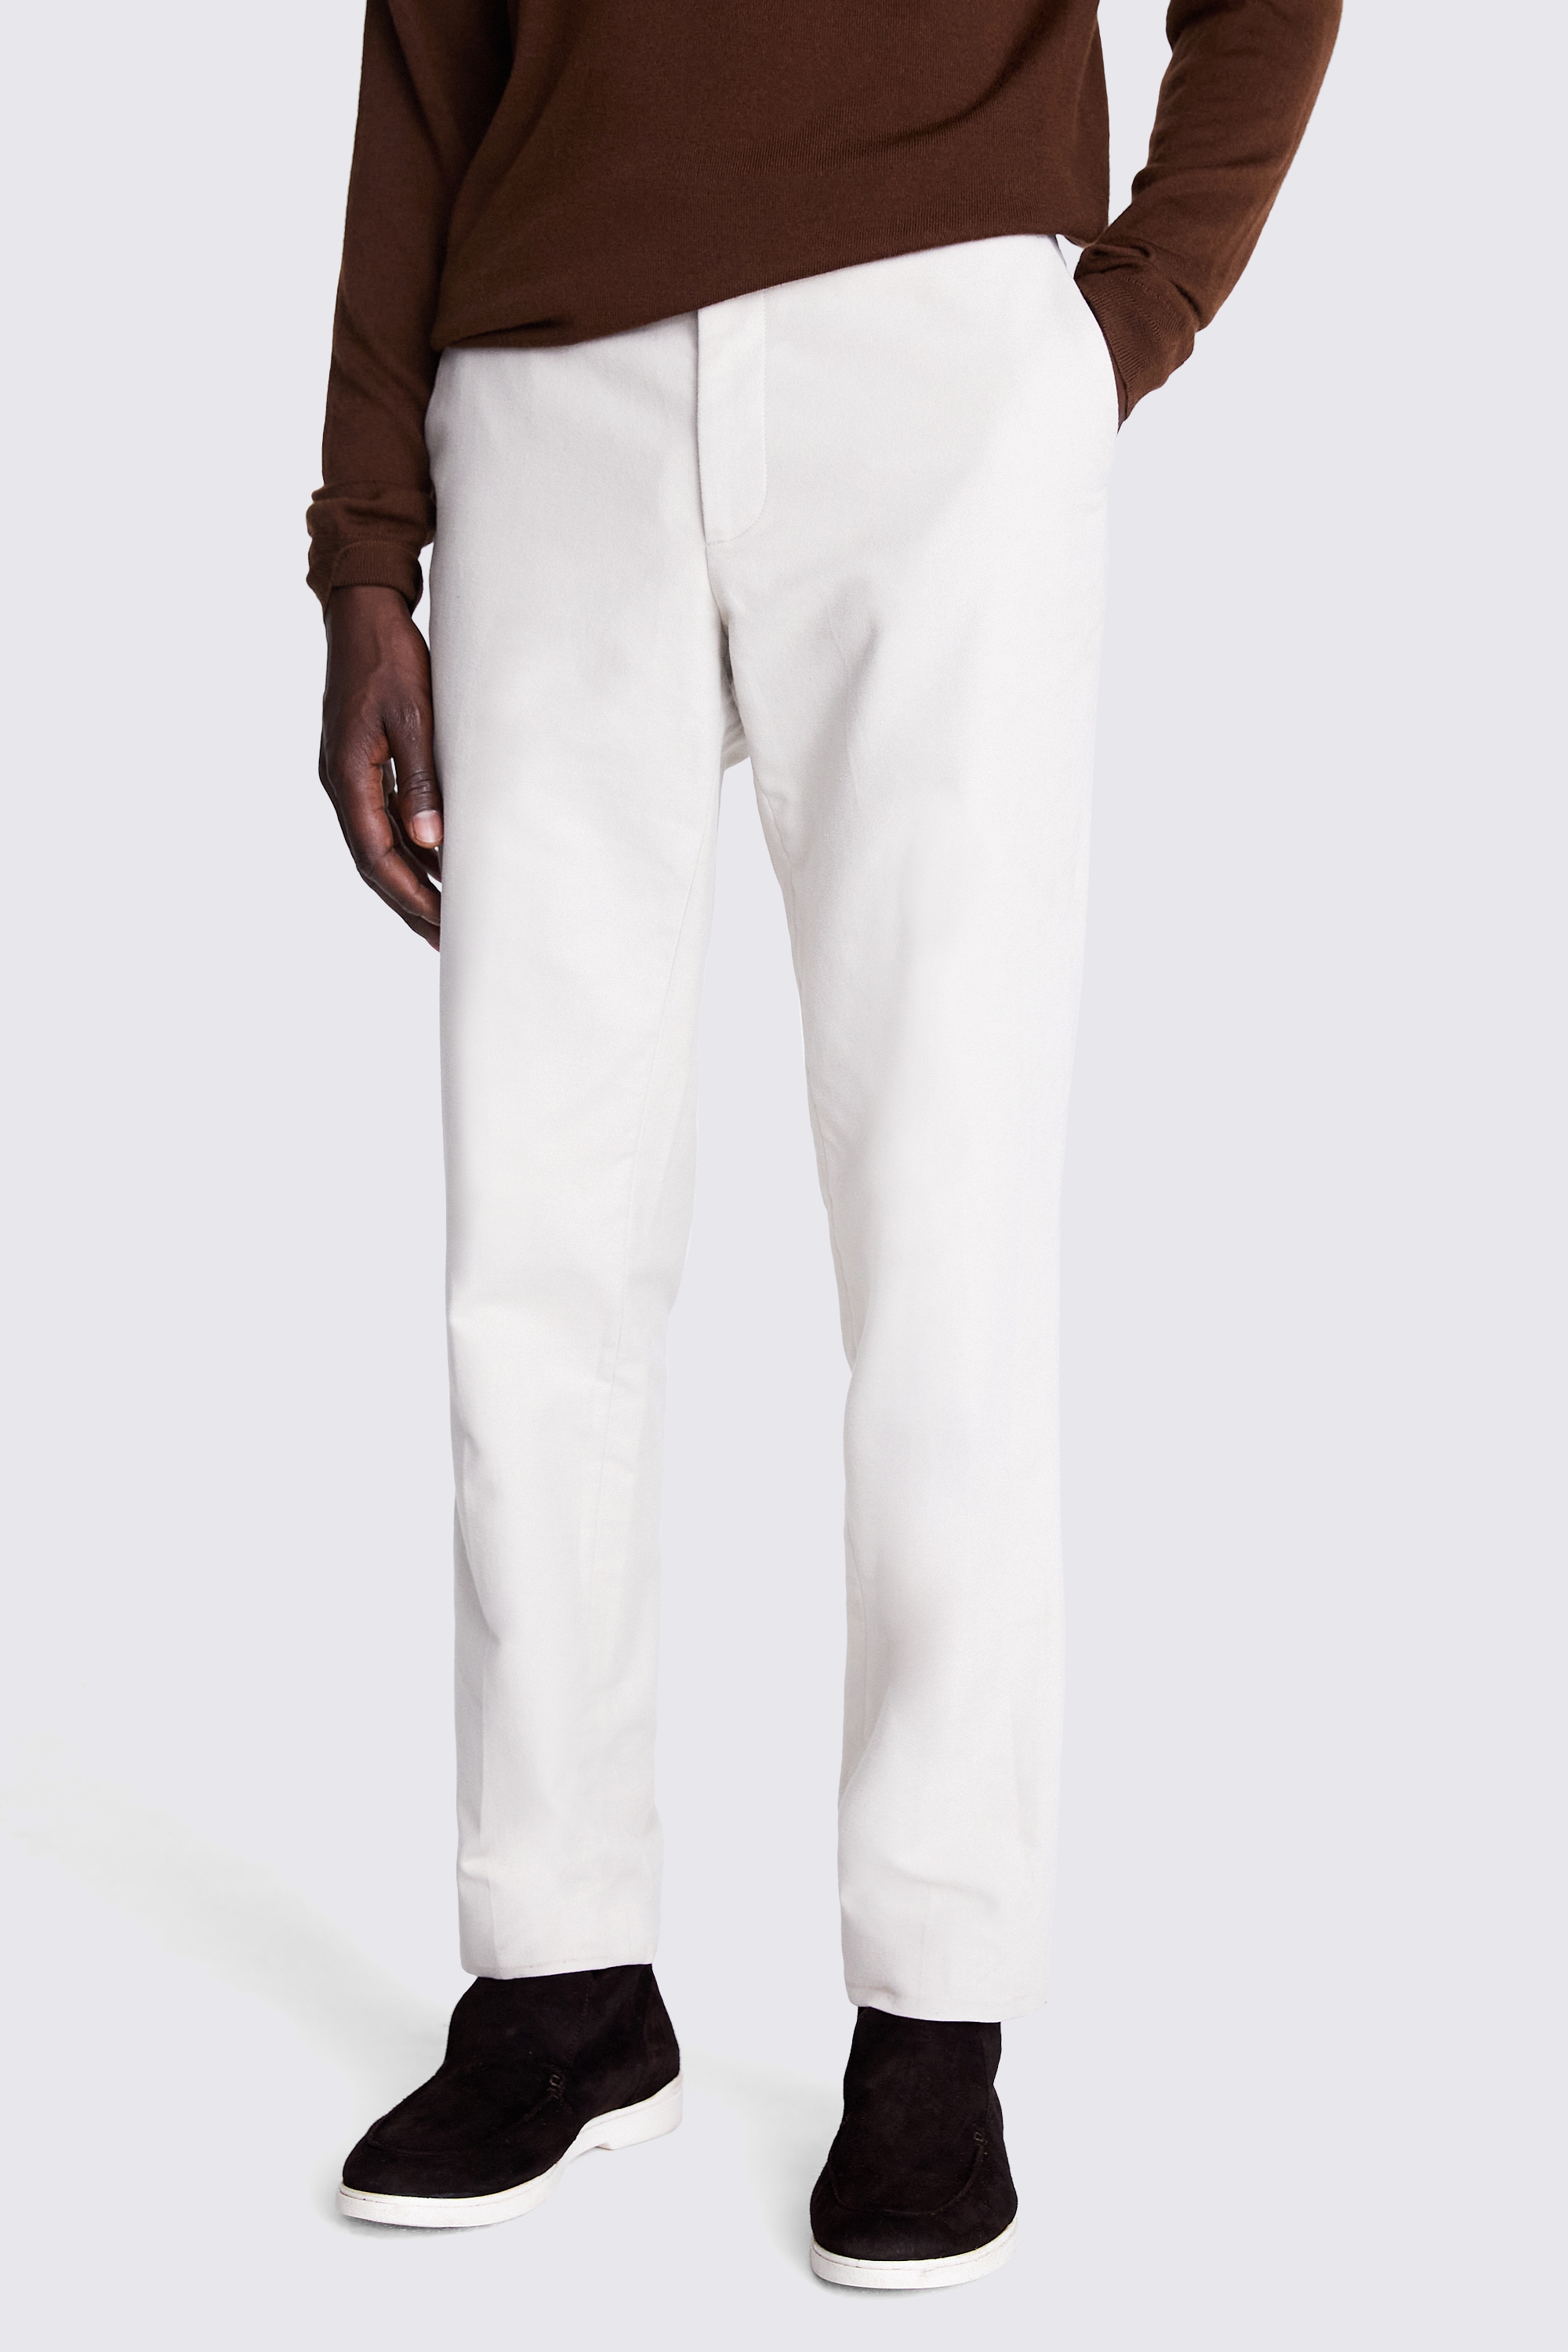 Tailored Fit Winter White Moleskin Trousers | Buy Online at Moss